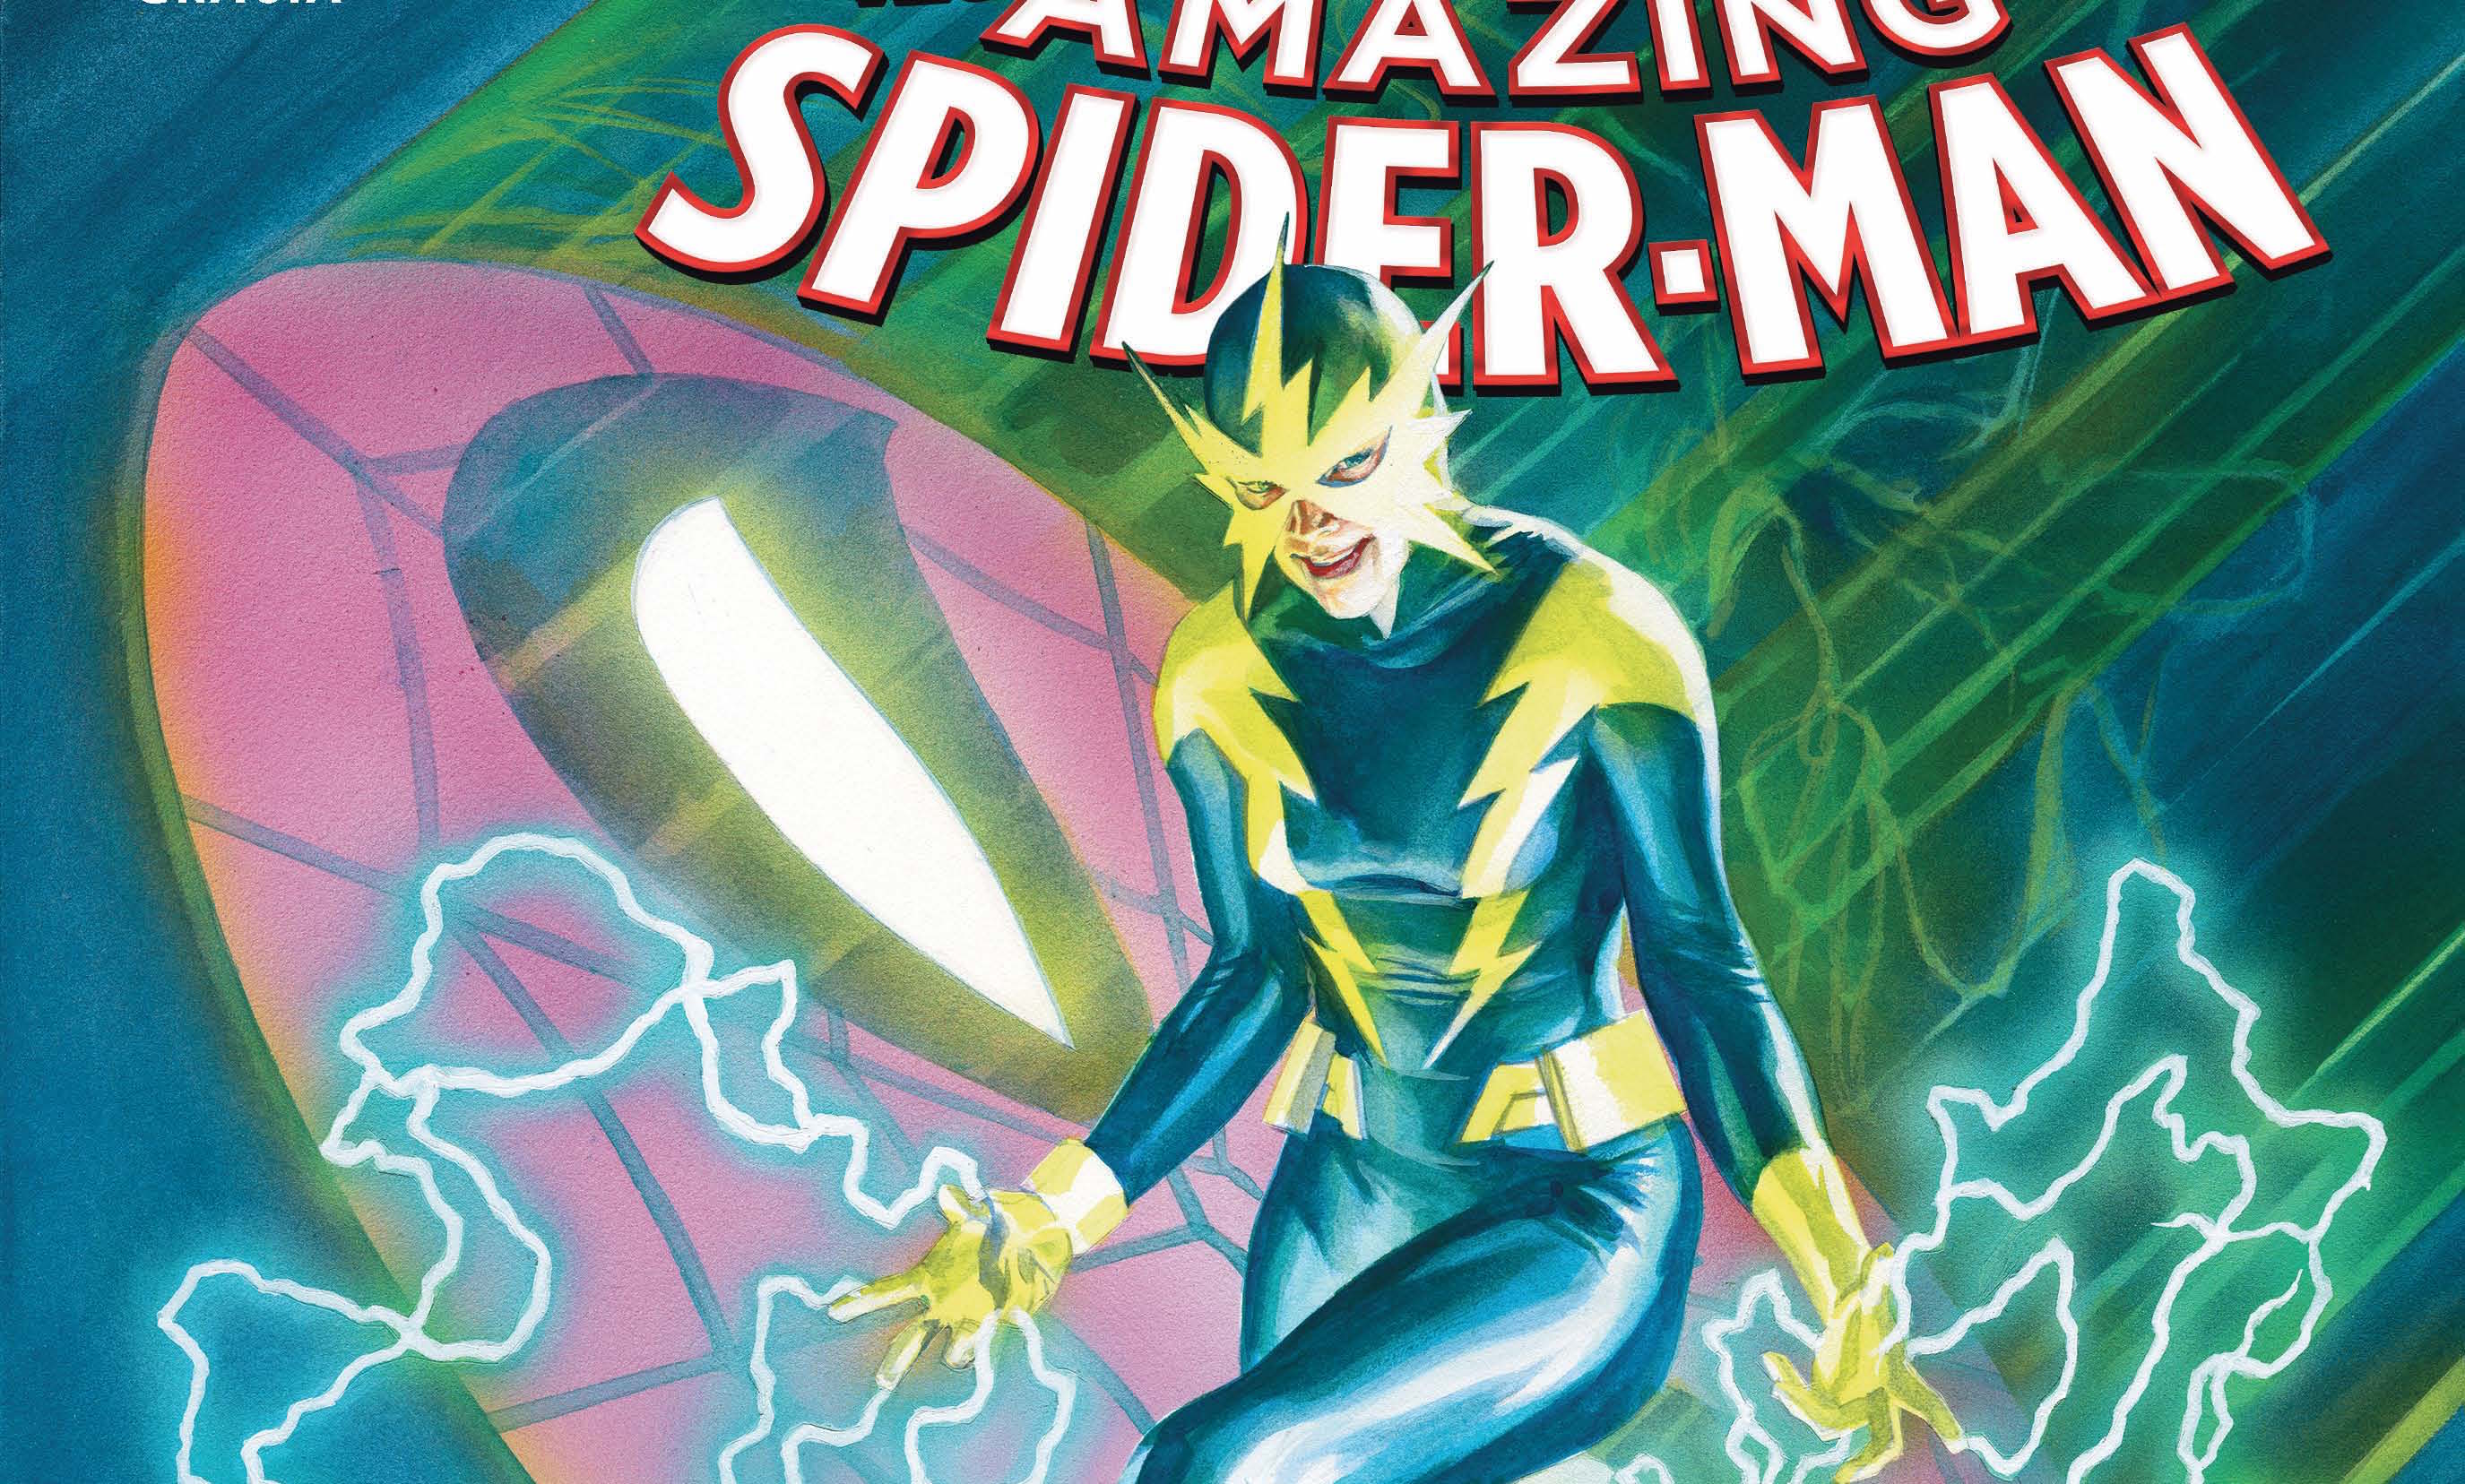 Amazing Spider-Man #17 Review